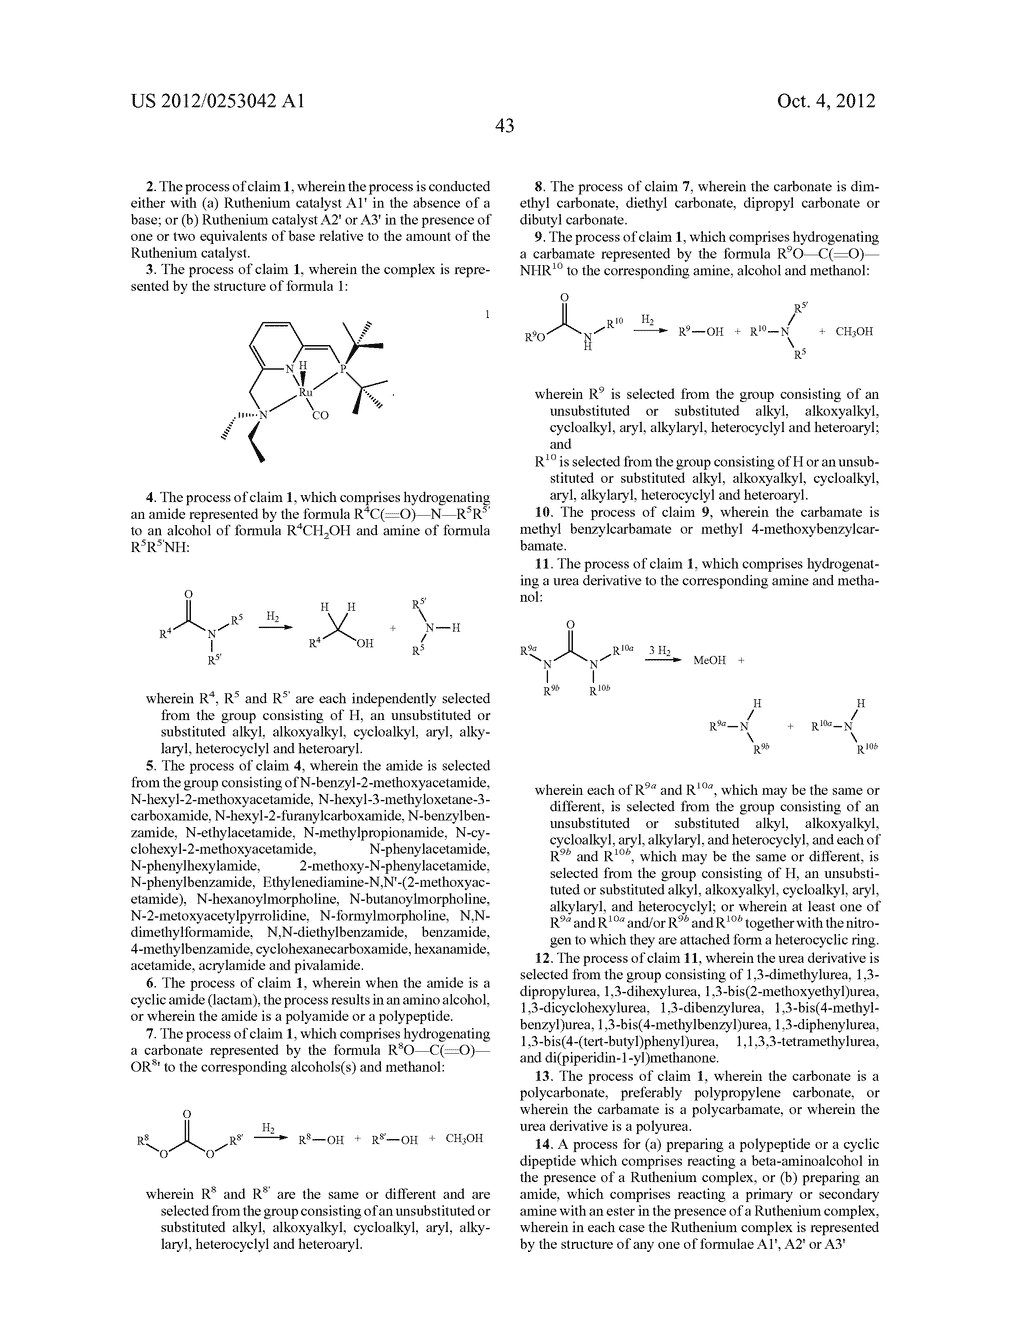 USE OF RUTHENIUM COMPLEXES FOR FORMATION AND/OR HYDROGENATION OF AMIDES     AND RELATED CARBOXYLIC ACID DERIVATIVES - diagram, schematic, and image 51